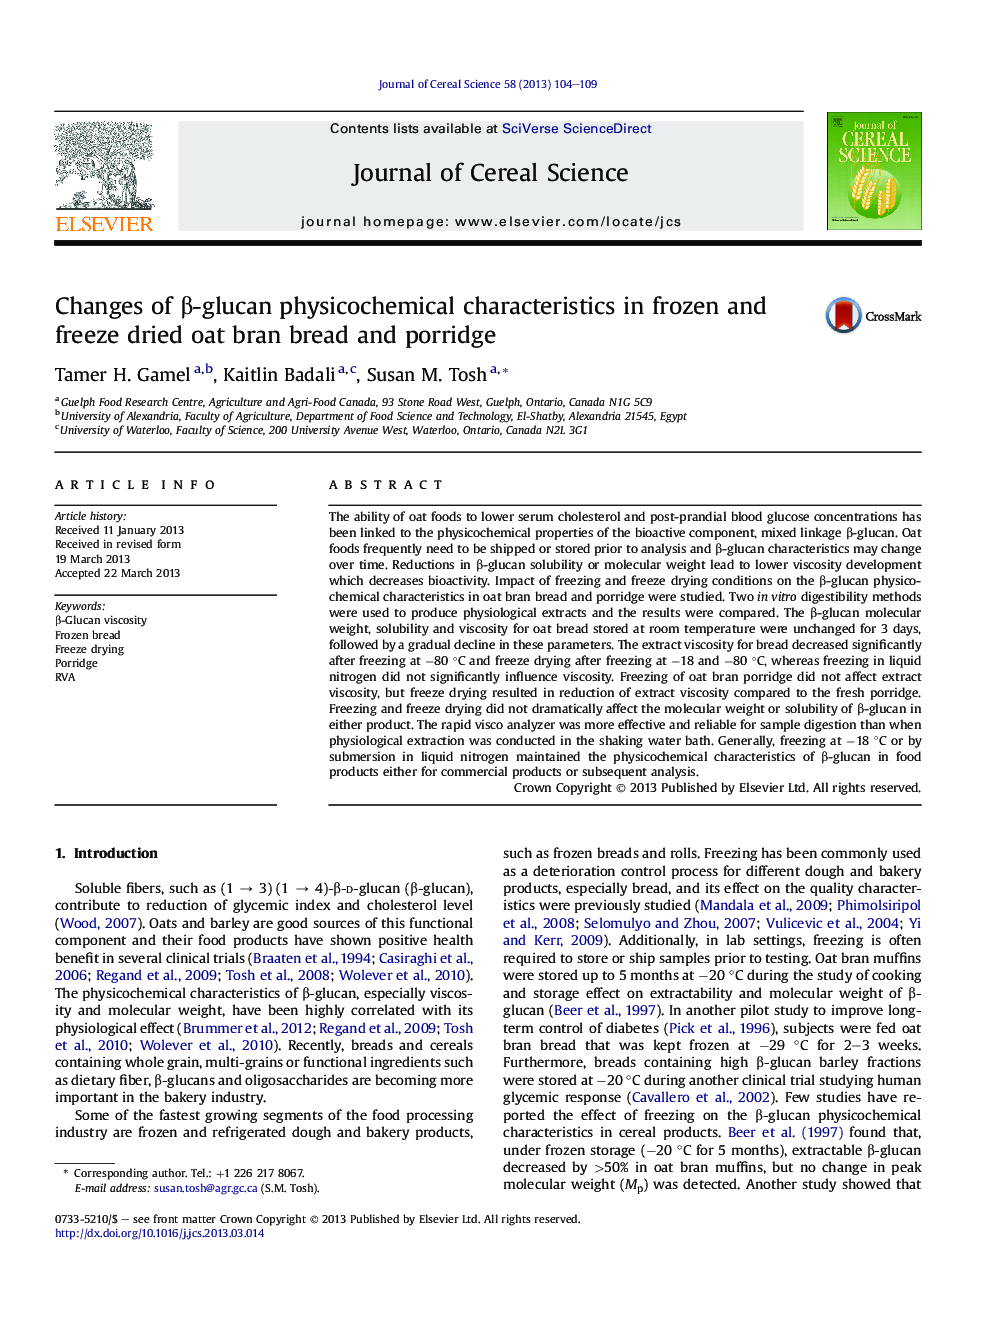 Changes of β-glucan physicochemical characteristics in frozen and freeze dried oat bran bread and porridge